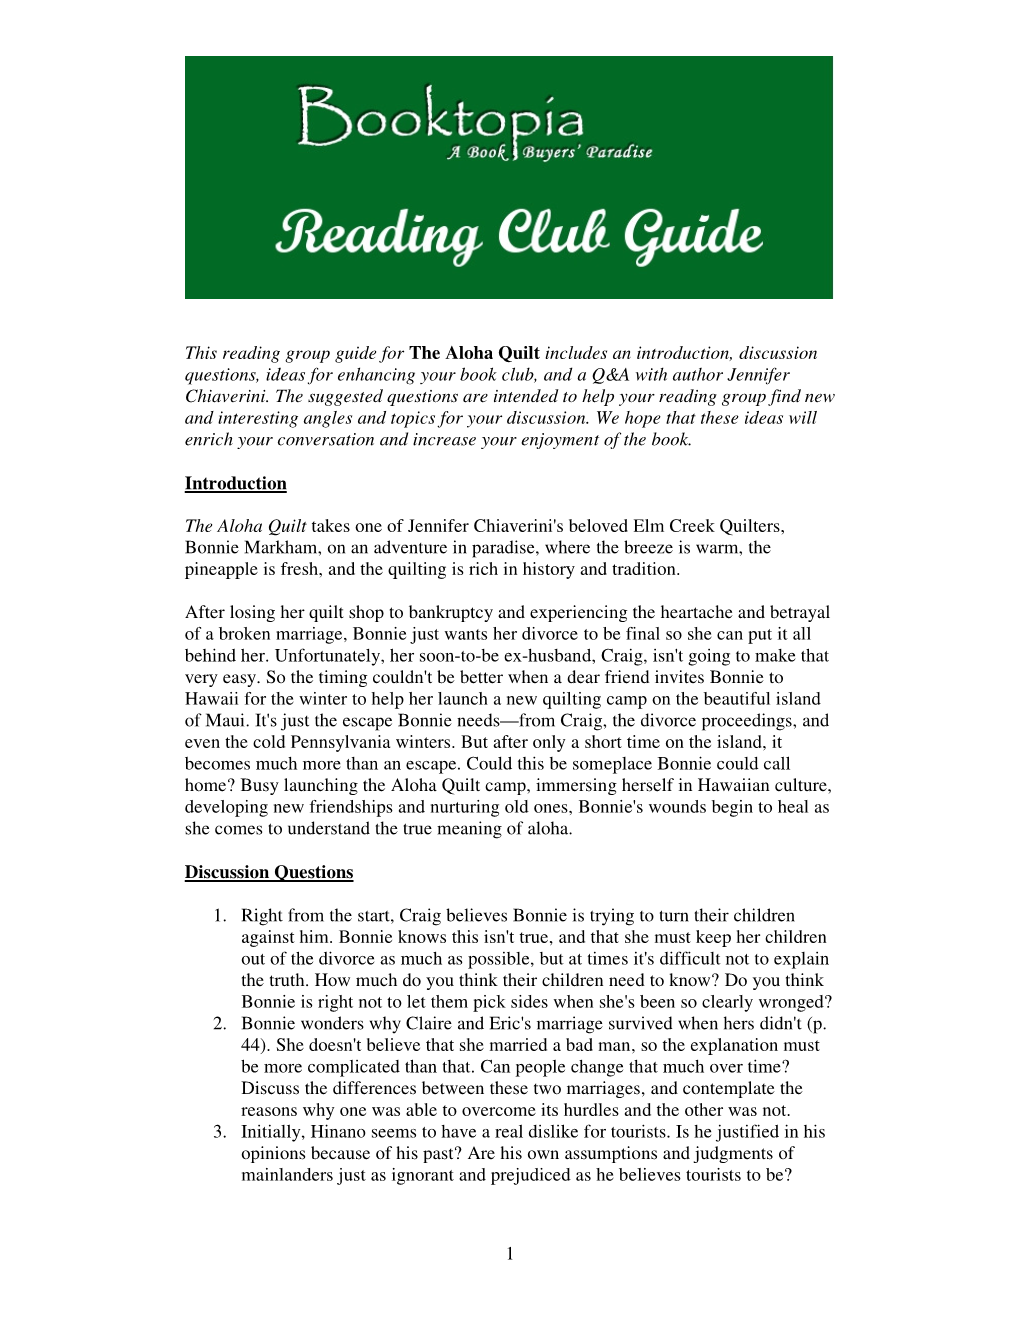 1 This Reading Group Guide for the Aloha Quilt Includes an Introduction